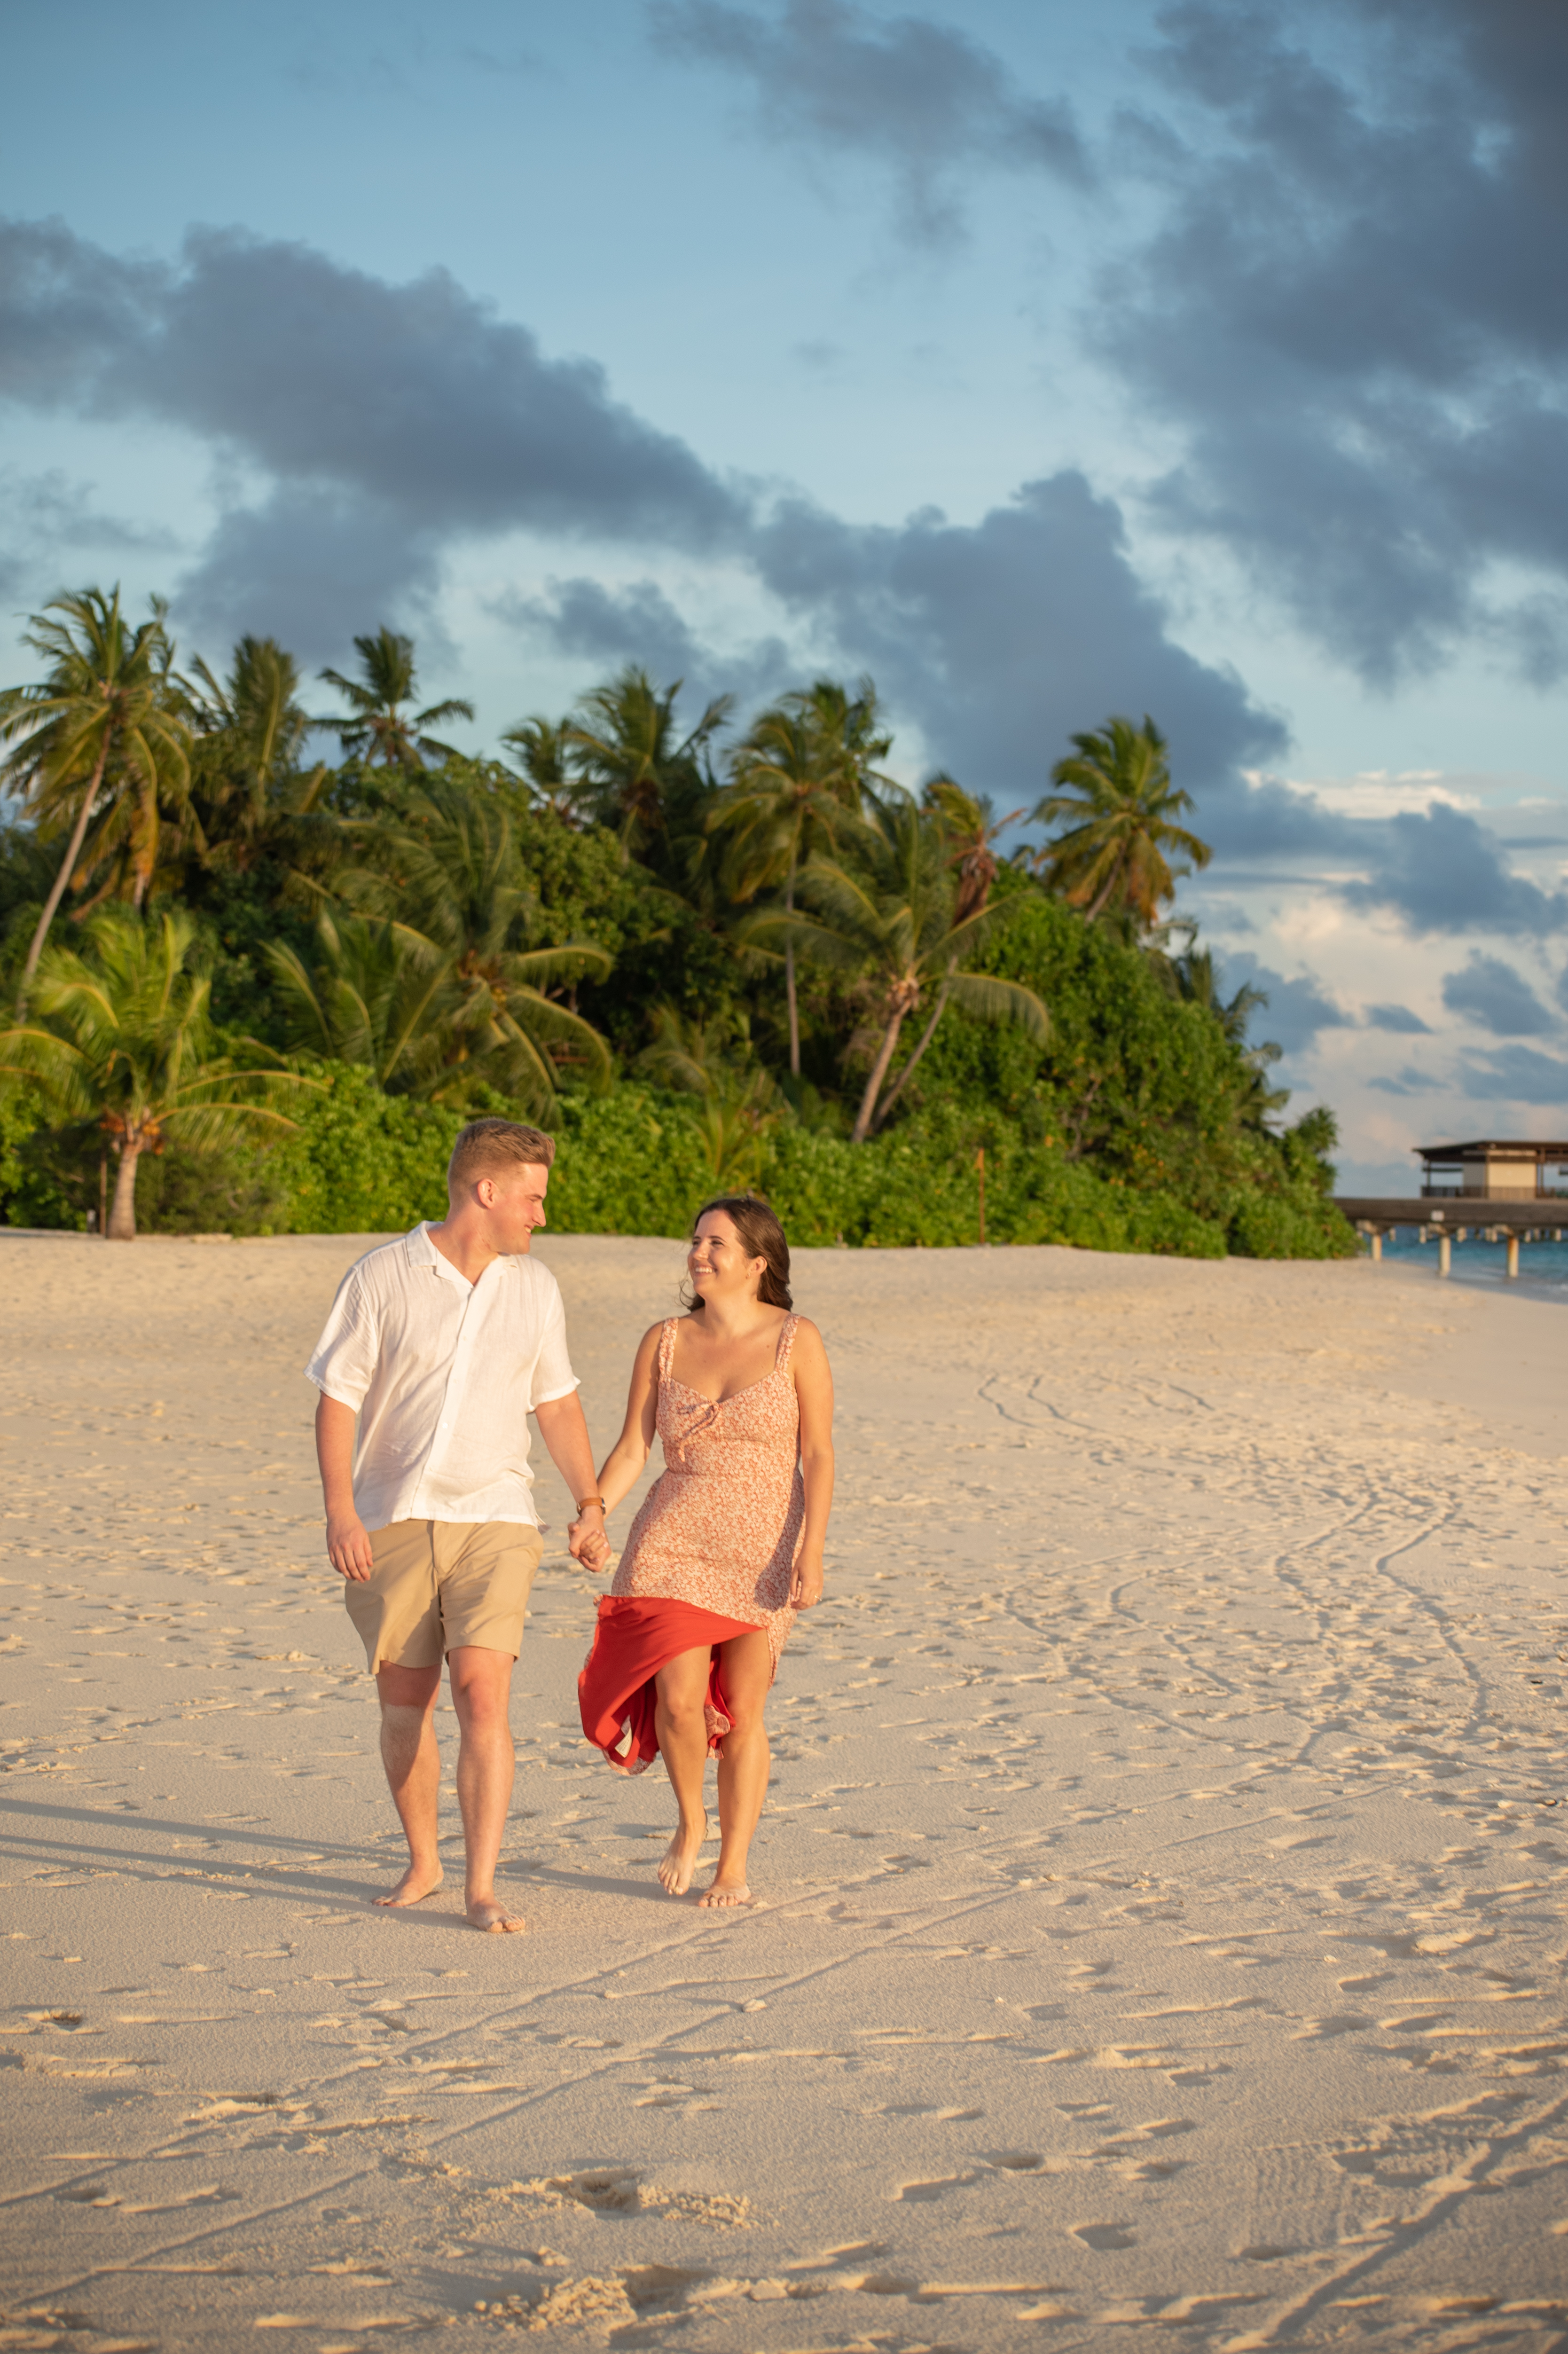 A couple walks hand-in-hand along a sandy beach at sunset, with lush palm trees and tropical foliage in the background. The woman wears a floral dress and the man a white shirt and beige shorts, both smiling as they enjoy their stroll.